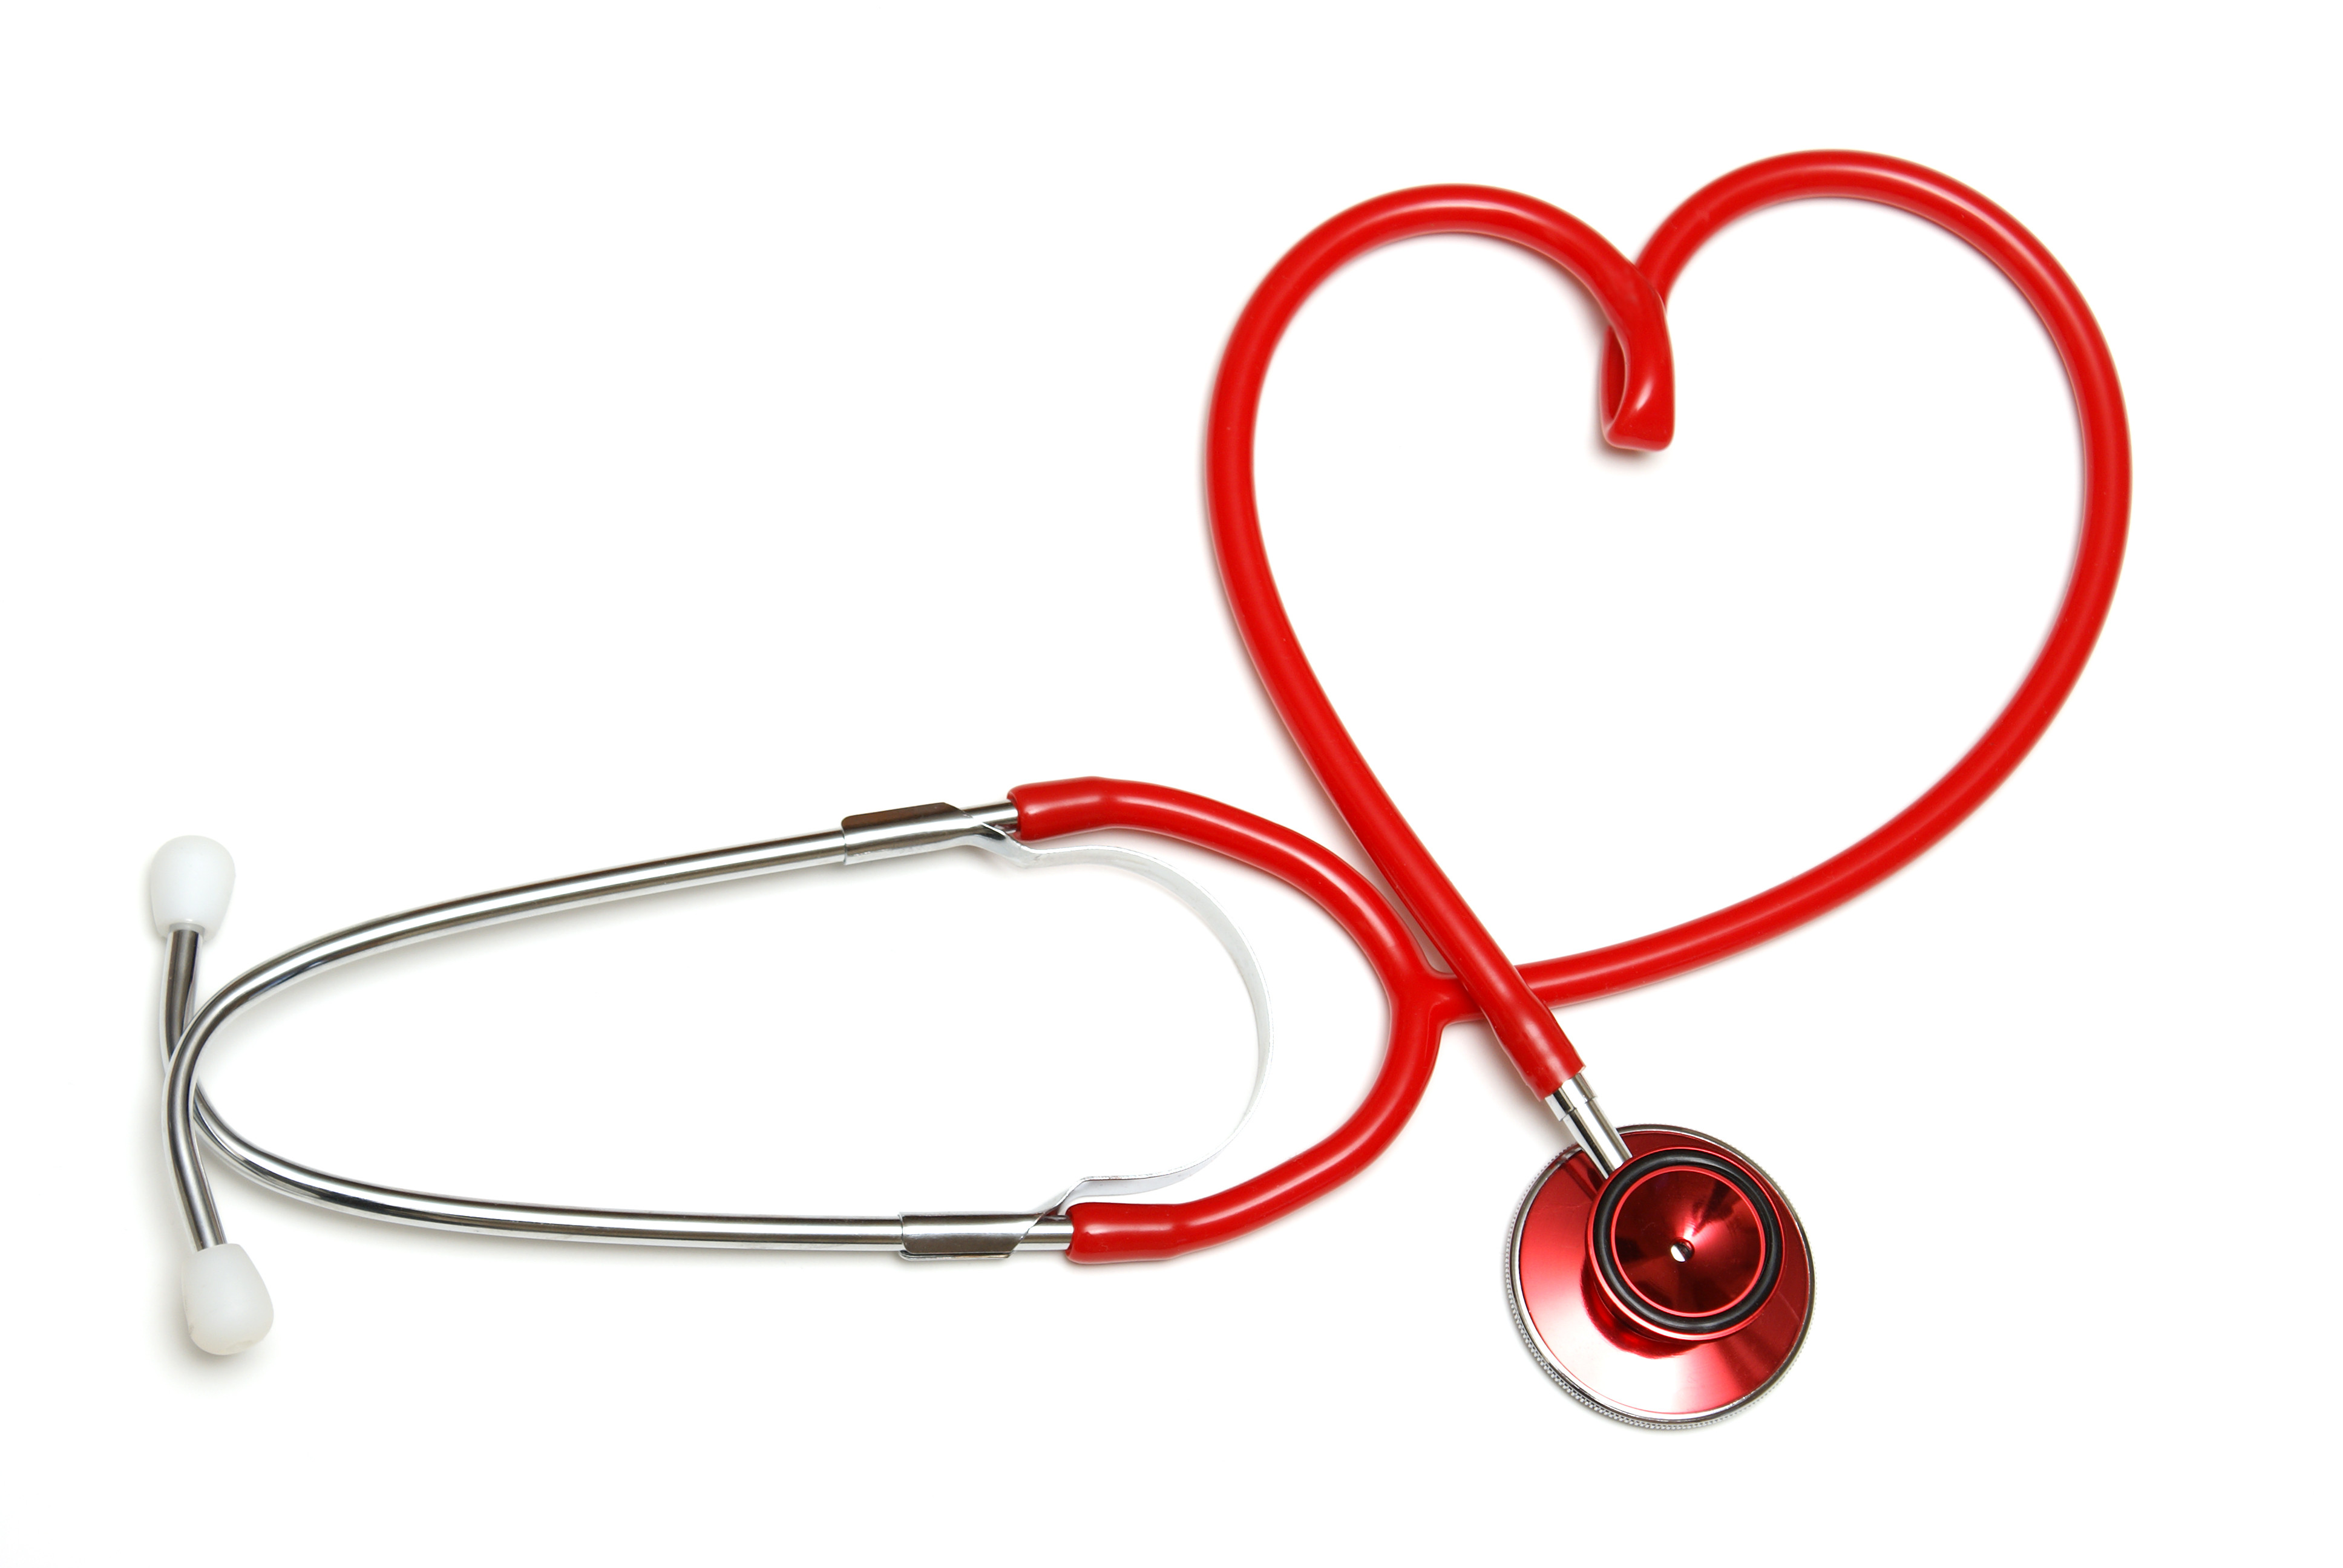 18 Stethoscope Pictures Free Cliparts That You Can Download To You    